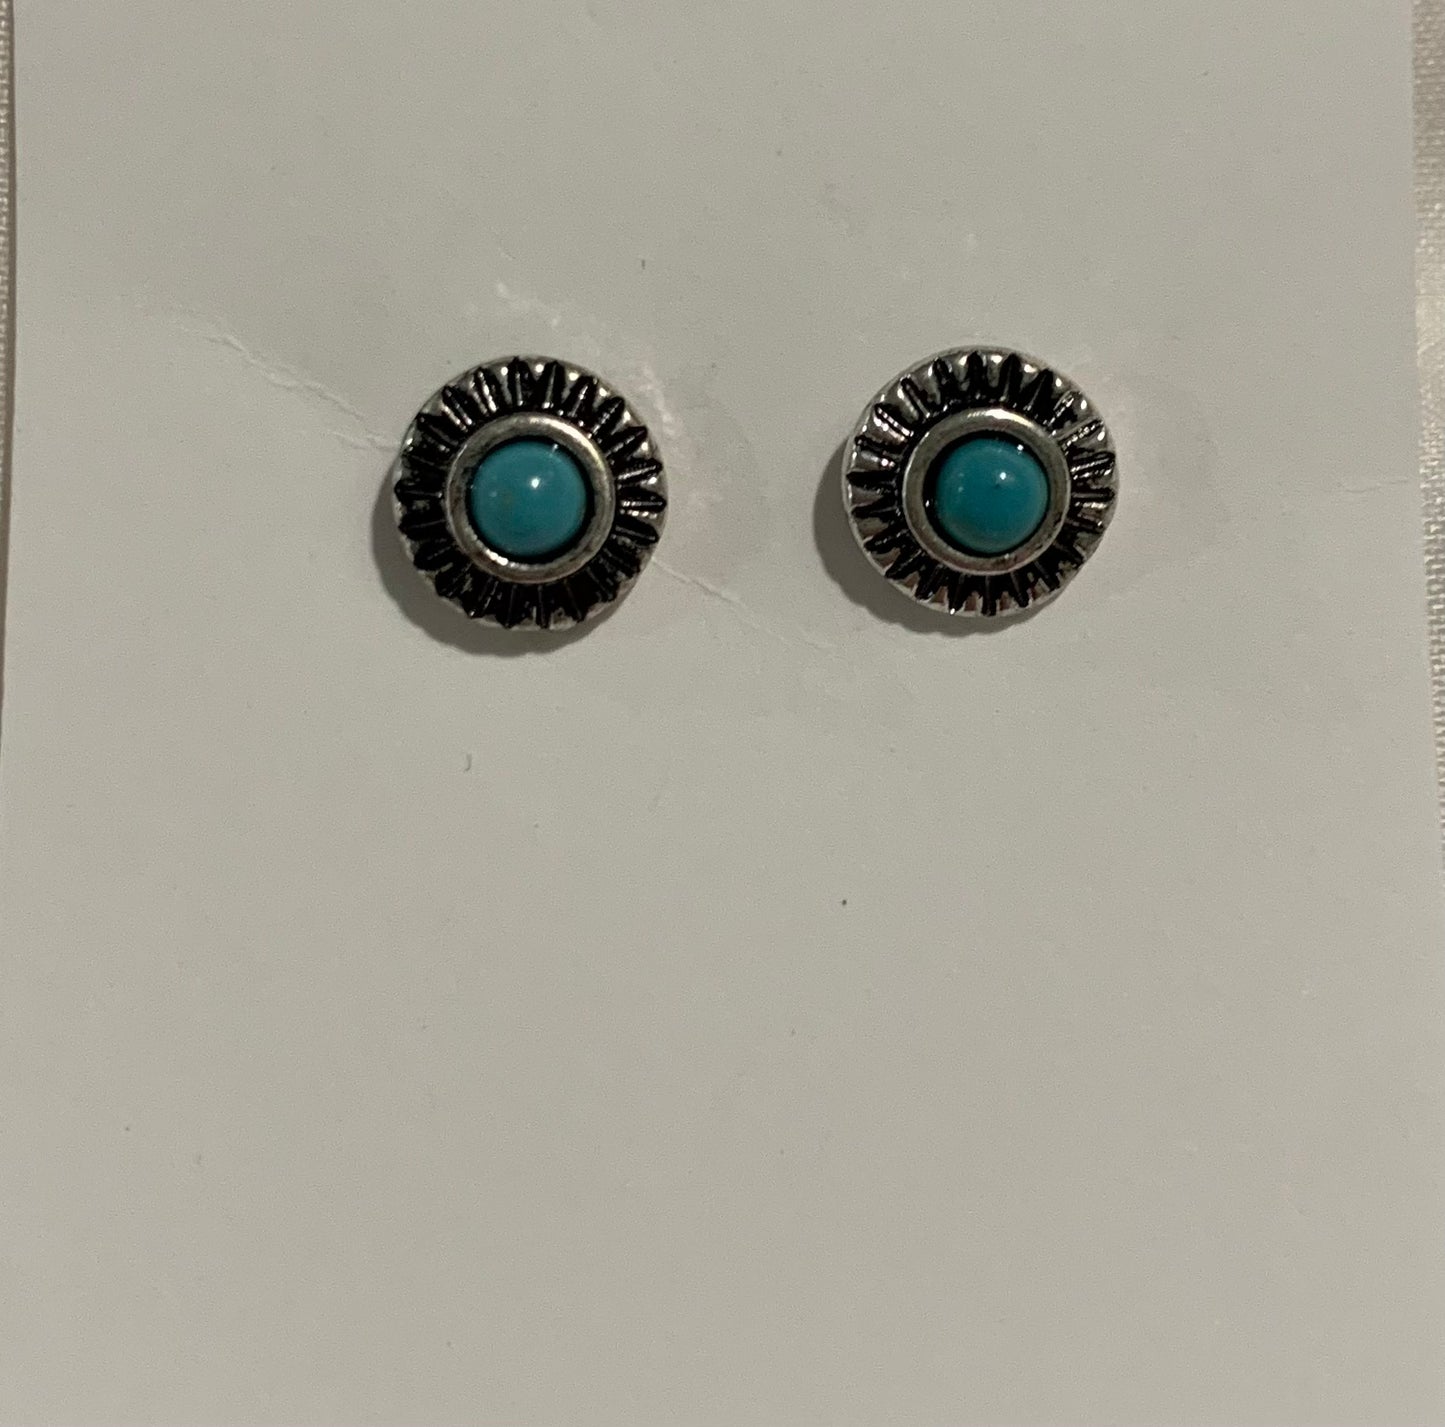 Small Turquoise Round Stud Earrings